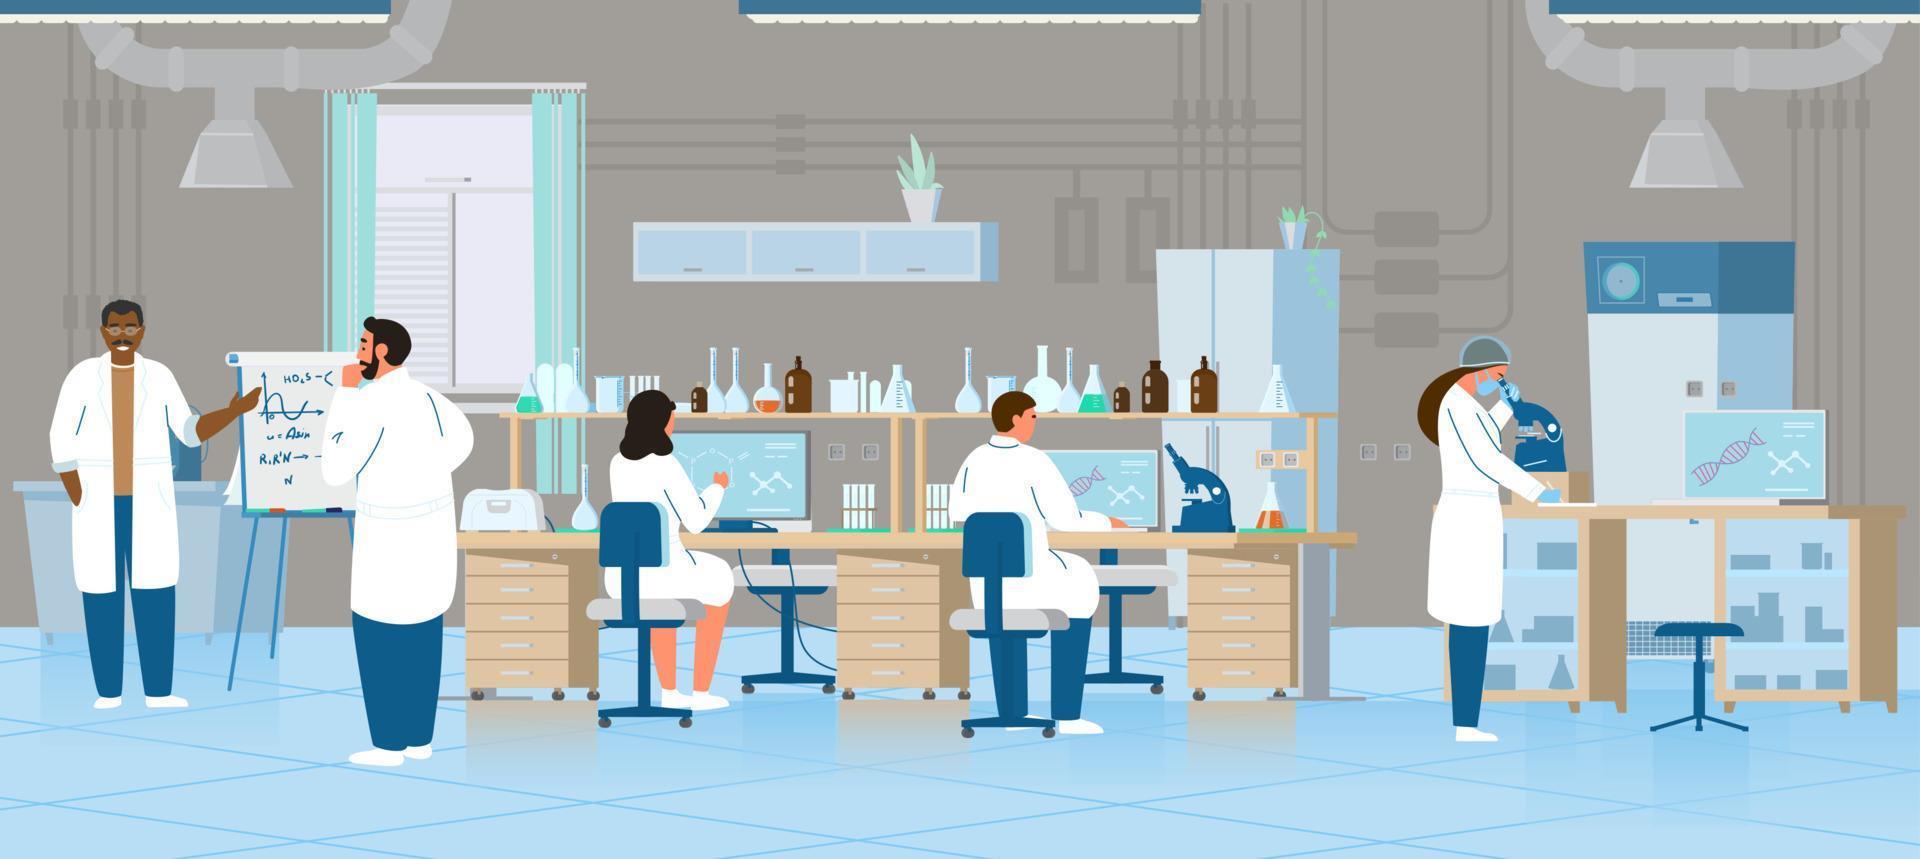 Scientists Or Doctors Men And Women Making Research In Chemical Laboratory. Laboratory Interior With Equipment. Flat Vector Illustration.